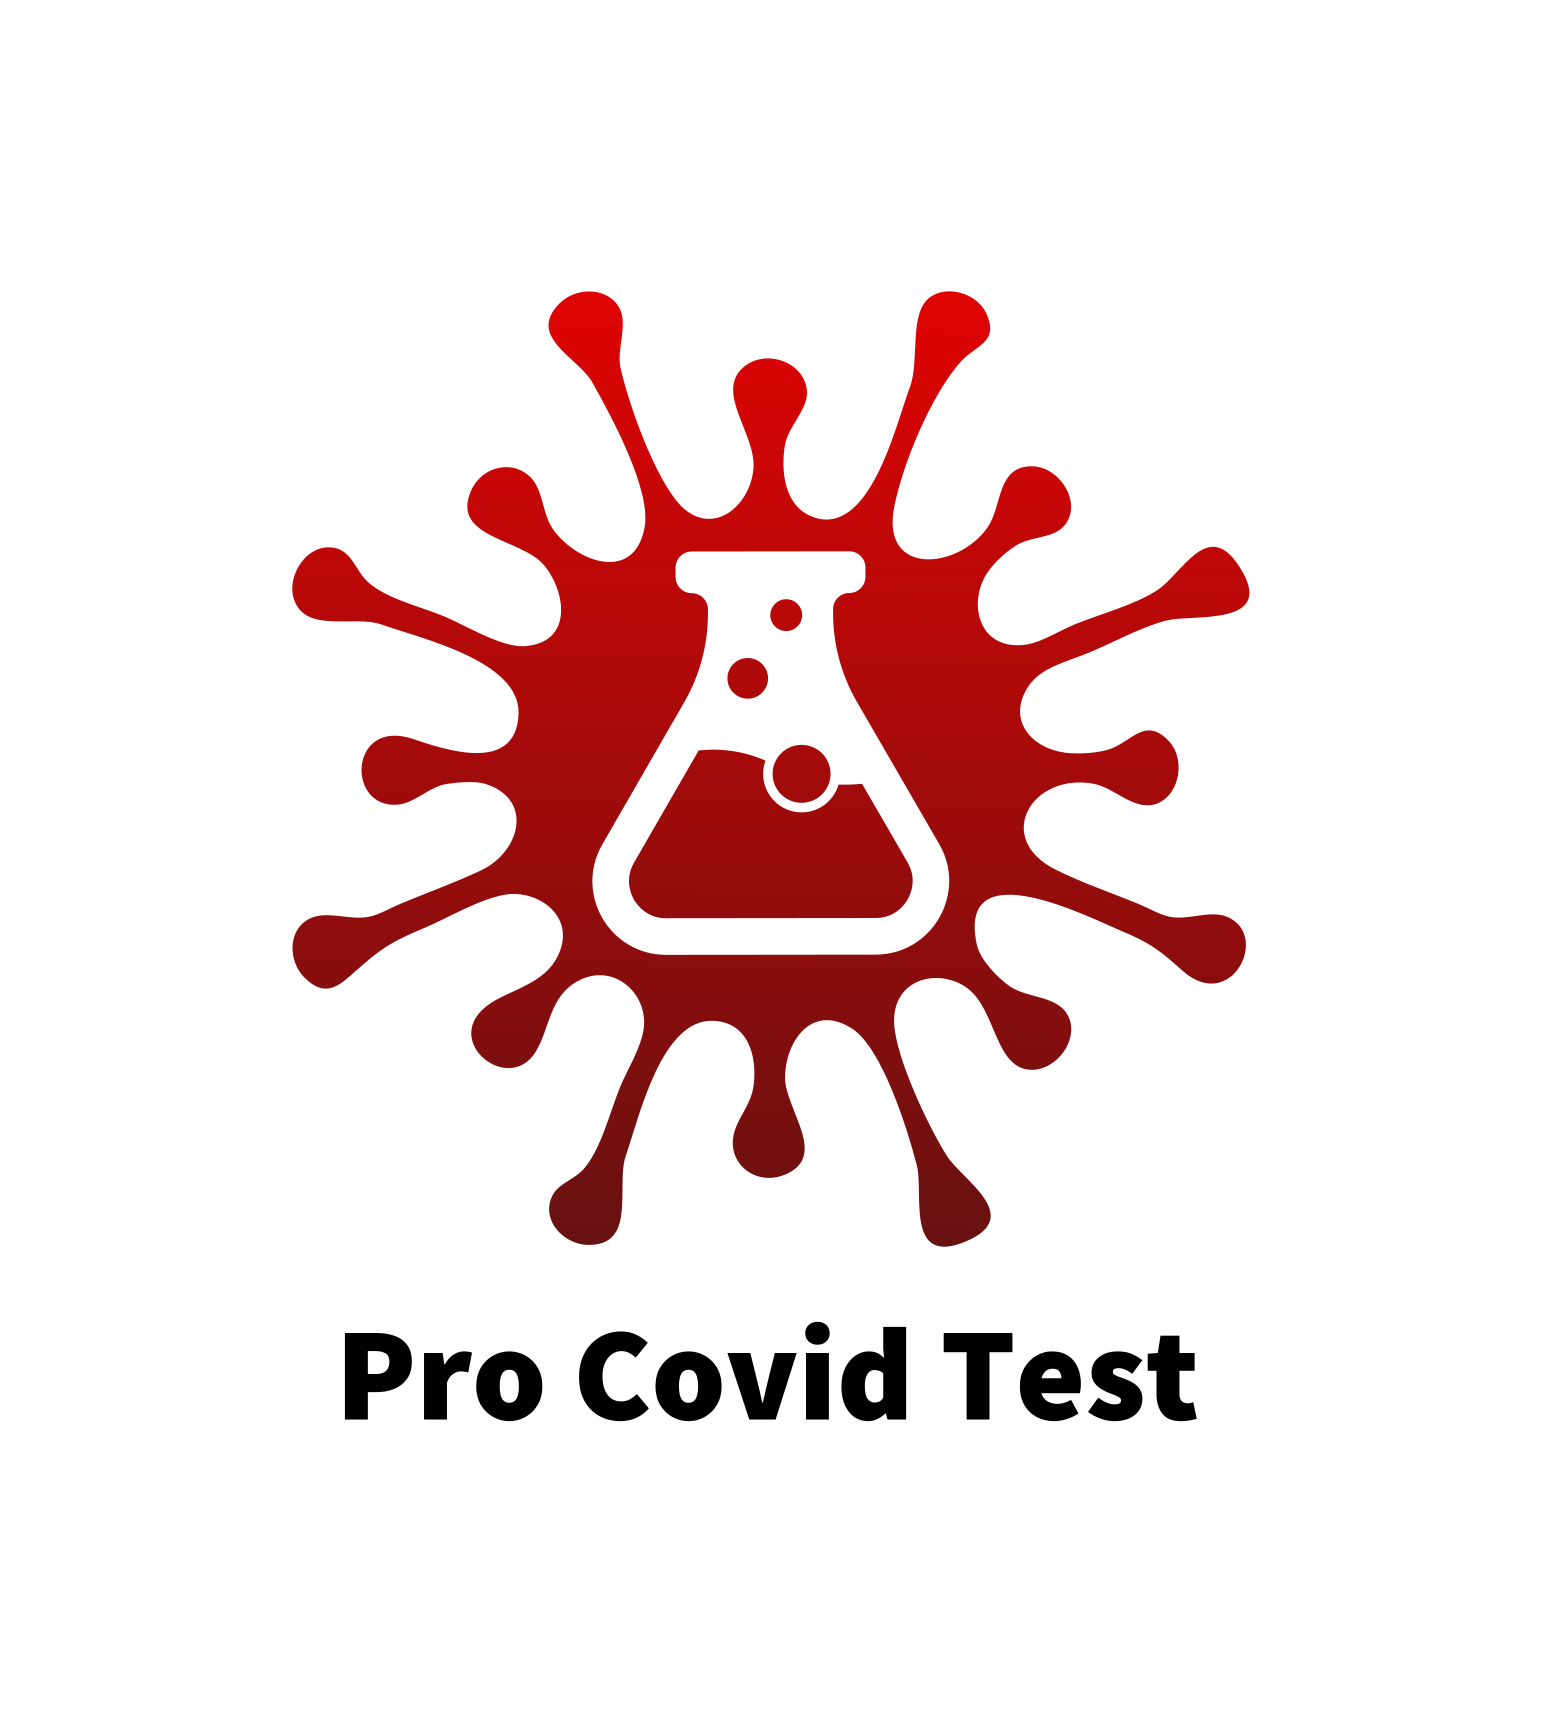 Pro Covid Test Provides Mobile Covid-19 Testing For South Chicago and Southern Suburbs